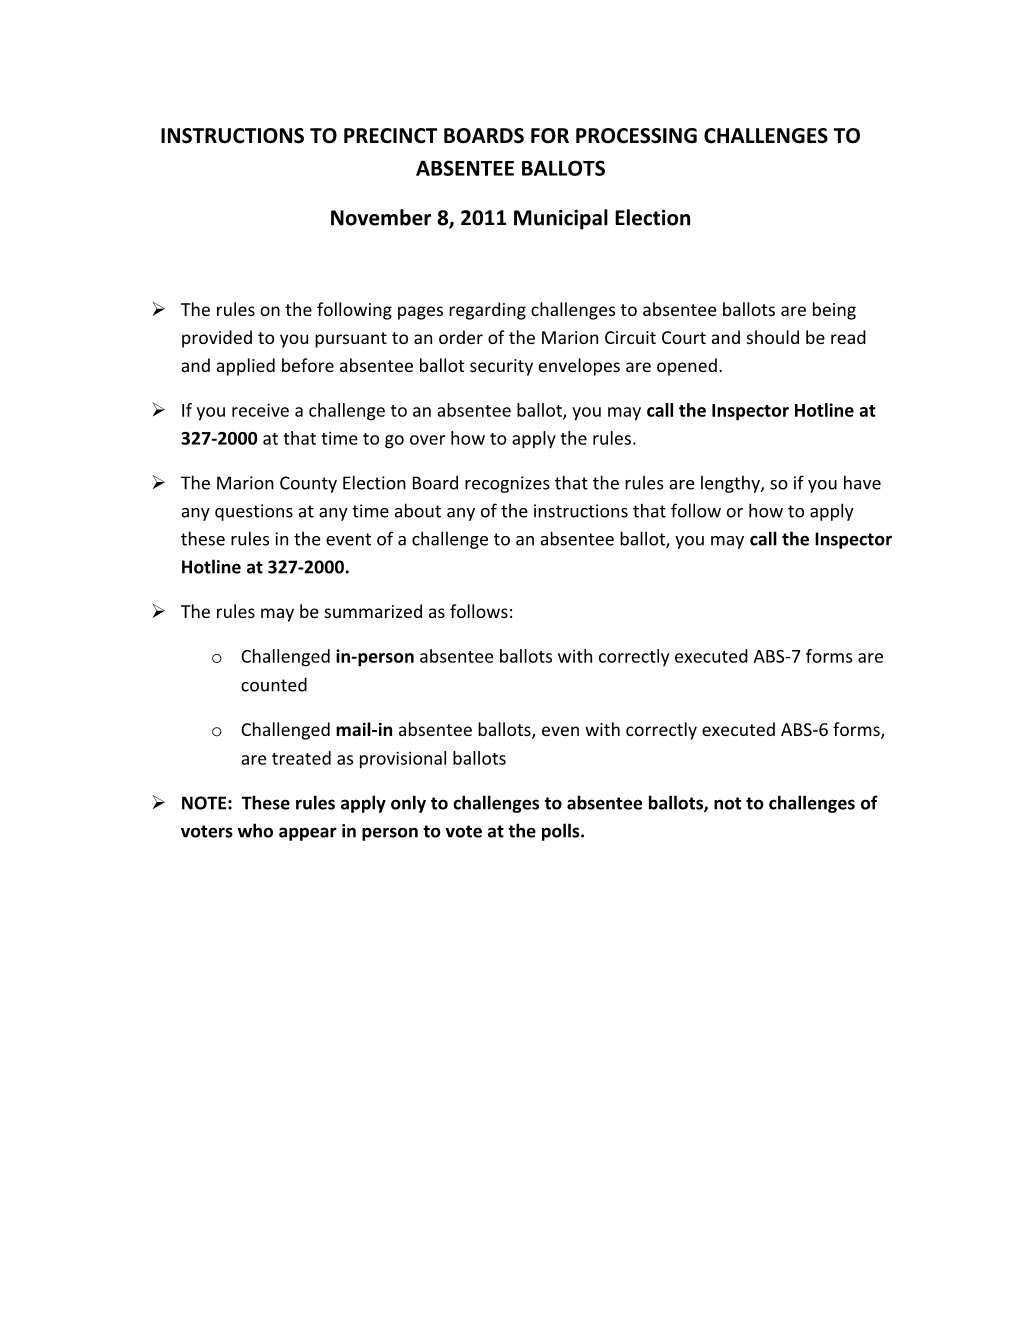 Instructions to Precinct Boards for Processing Challenges to Absentee Ballots